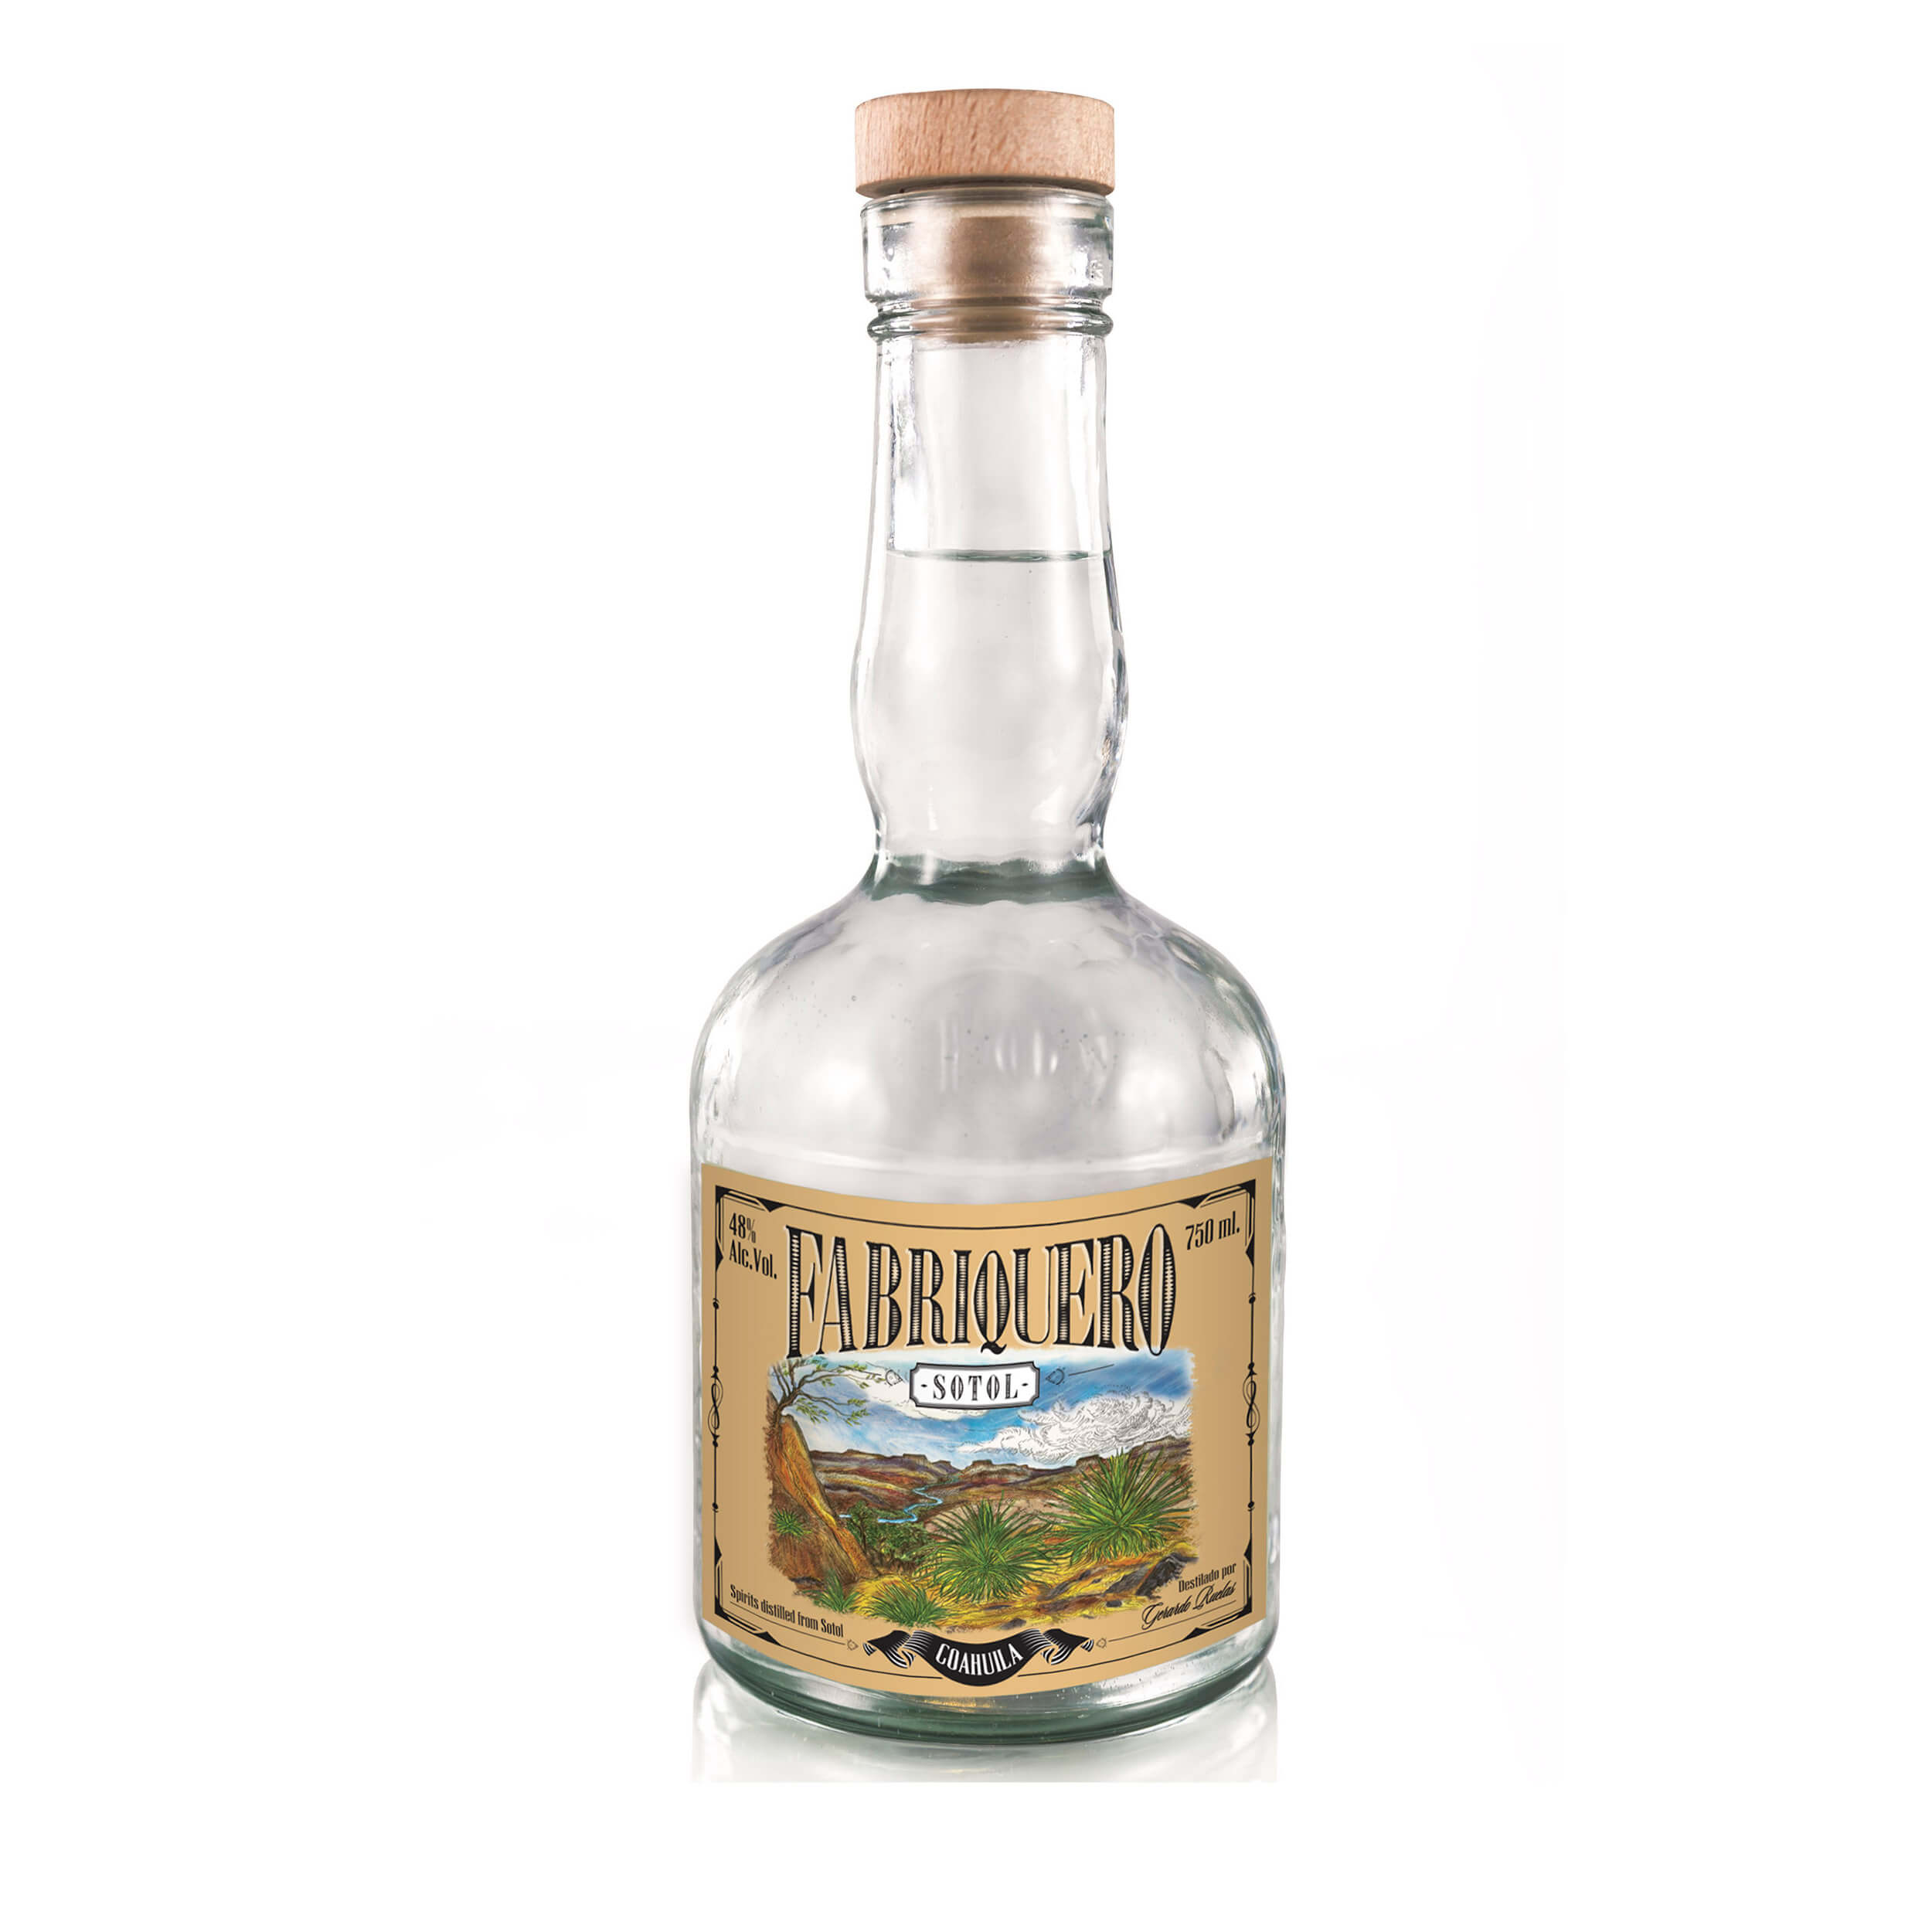 Mexico’s first and oldest Sotol distillery produces this finest of Sotols.

With no corners cut, the sotol plants are hand-picked individually at peak ripeness and cooked for 5 days in a lava rock-lined pit using acacia and mesquite. They are then crushed by hand before moving to open-air fermentation in concrete tanks.